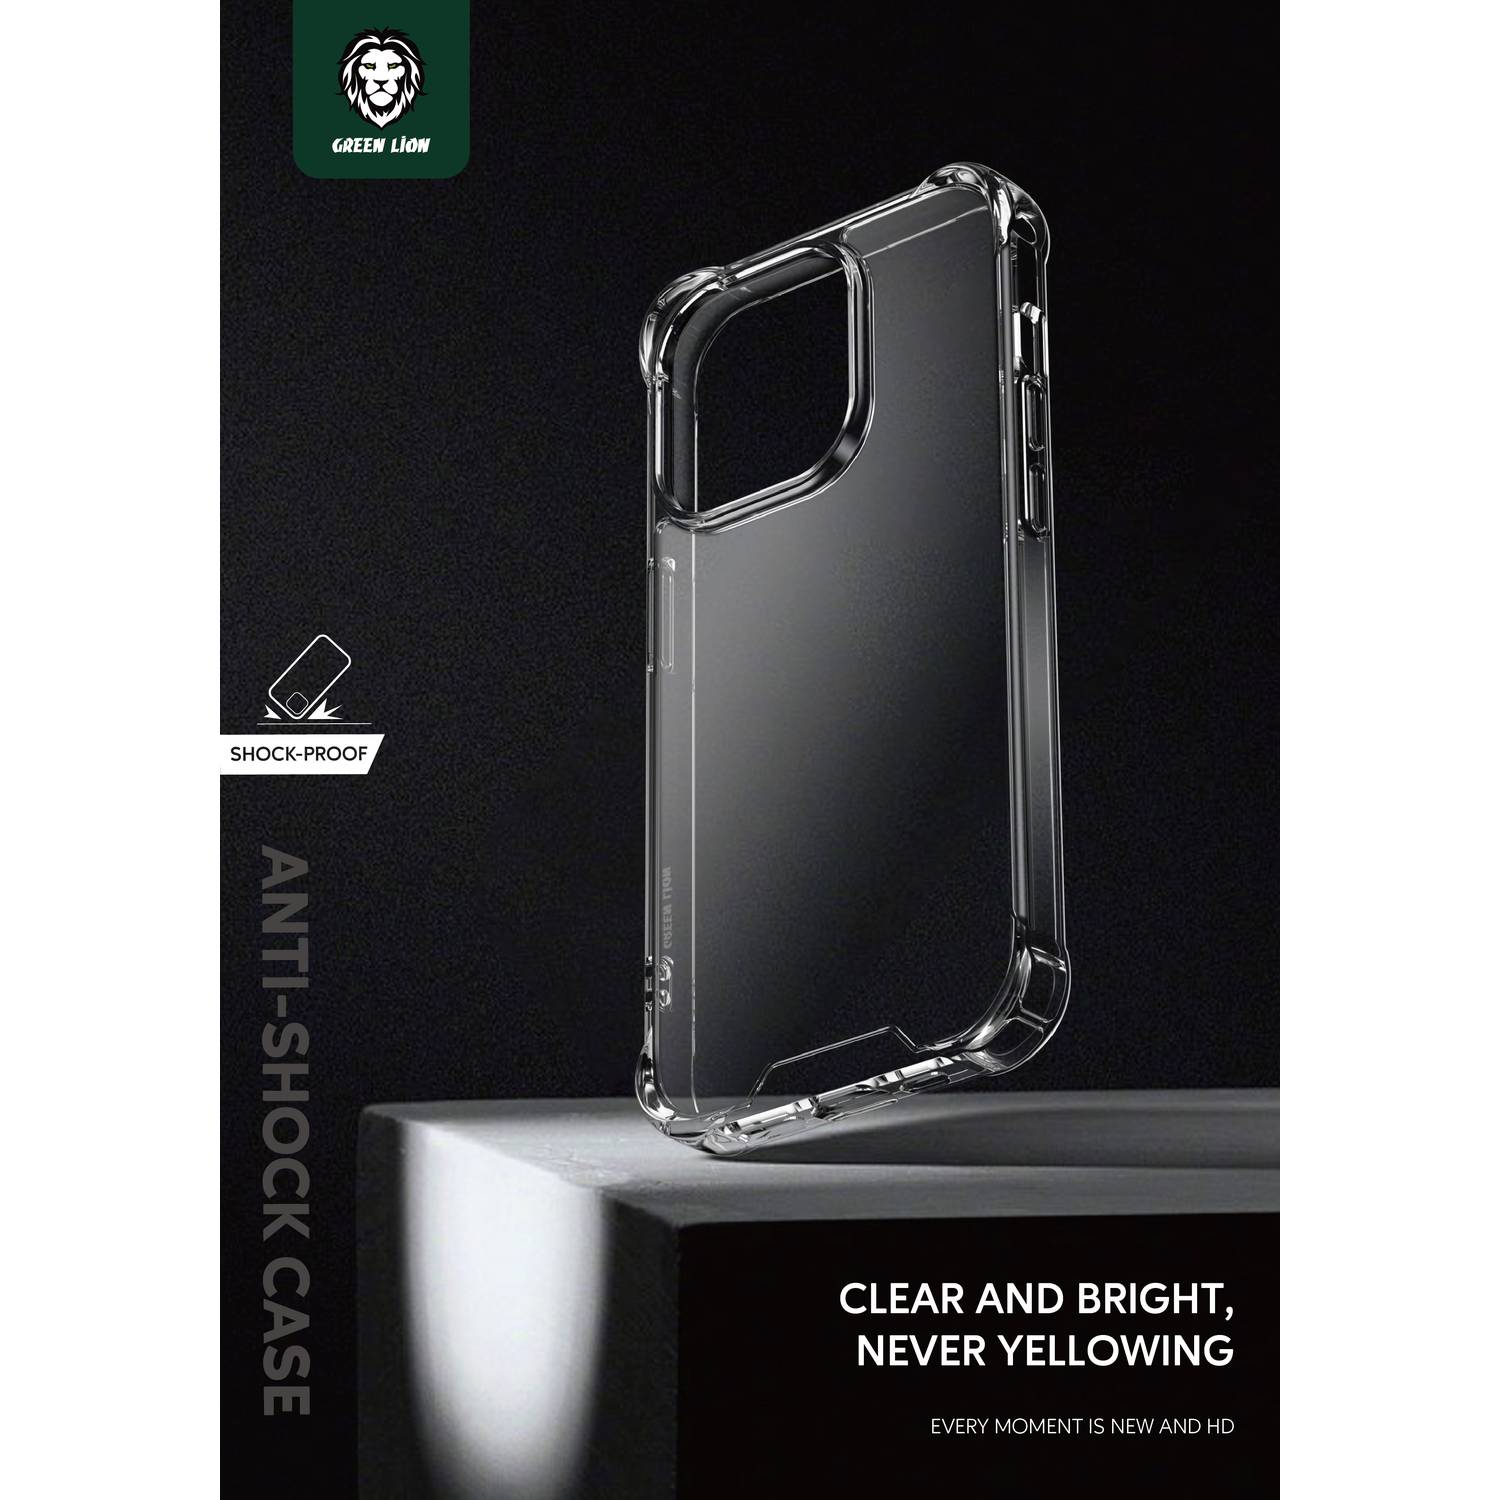 Green Lion Anti-Shock-Proof Case for iPhone 14 Series in sri lanka